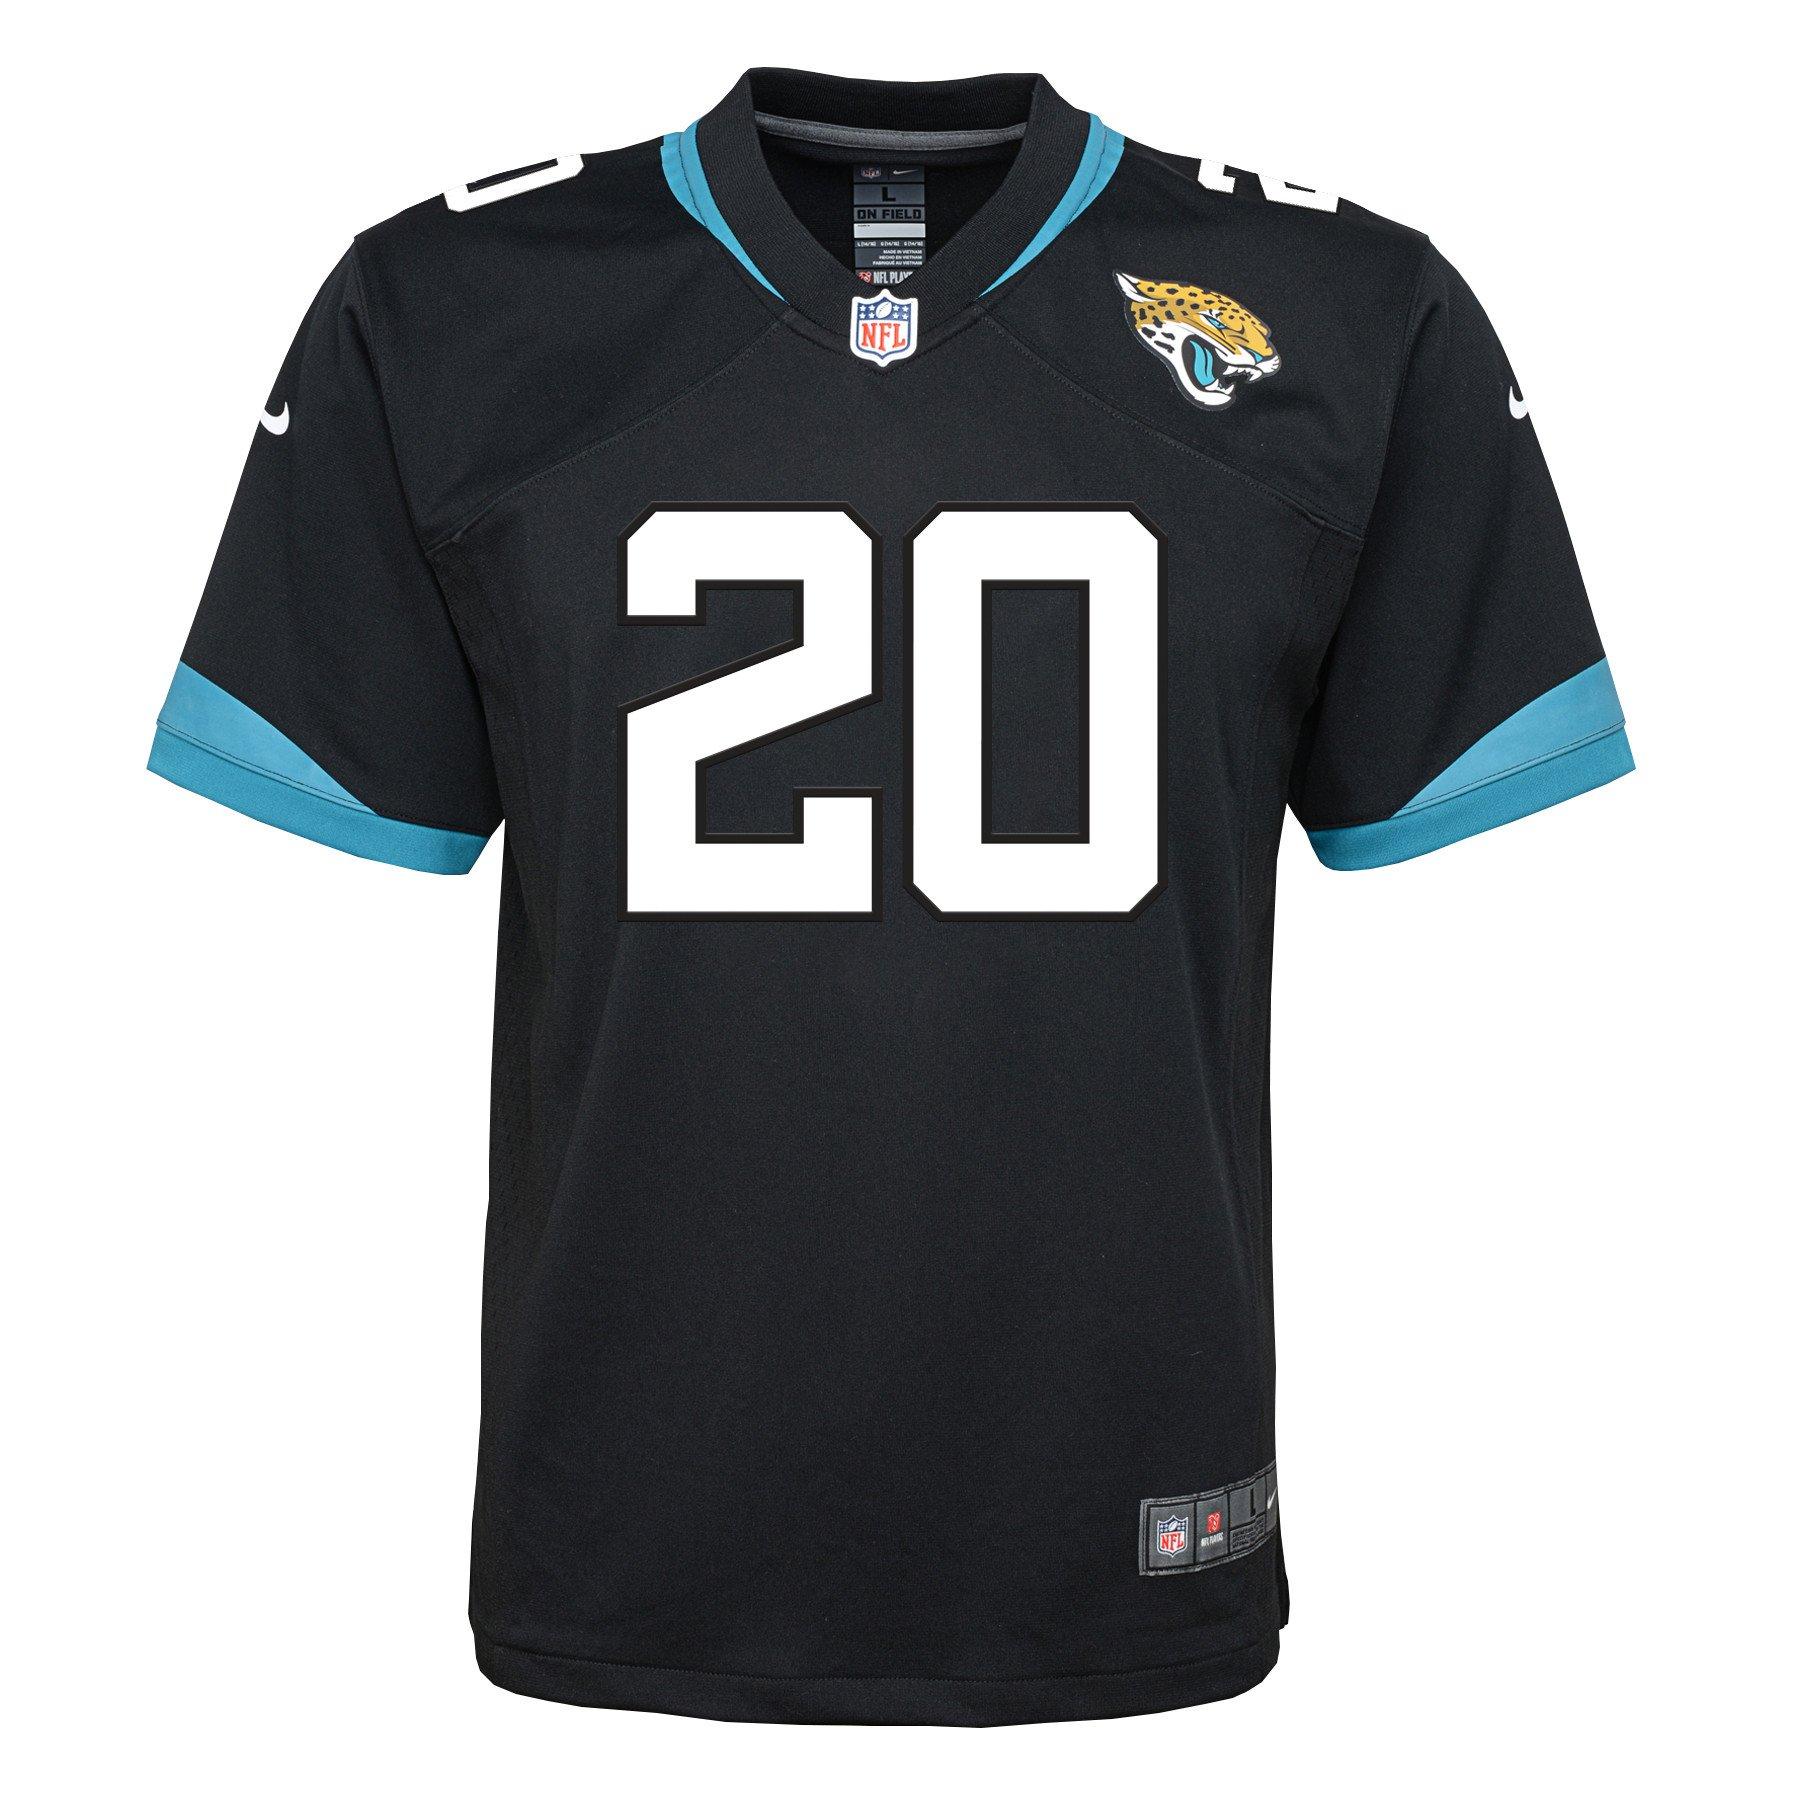 jalen ramsey jersey youth